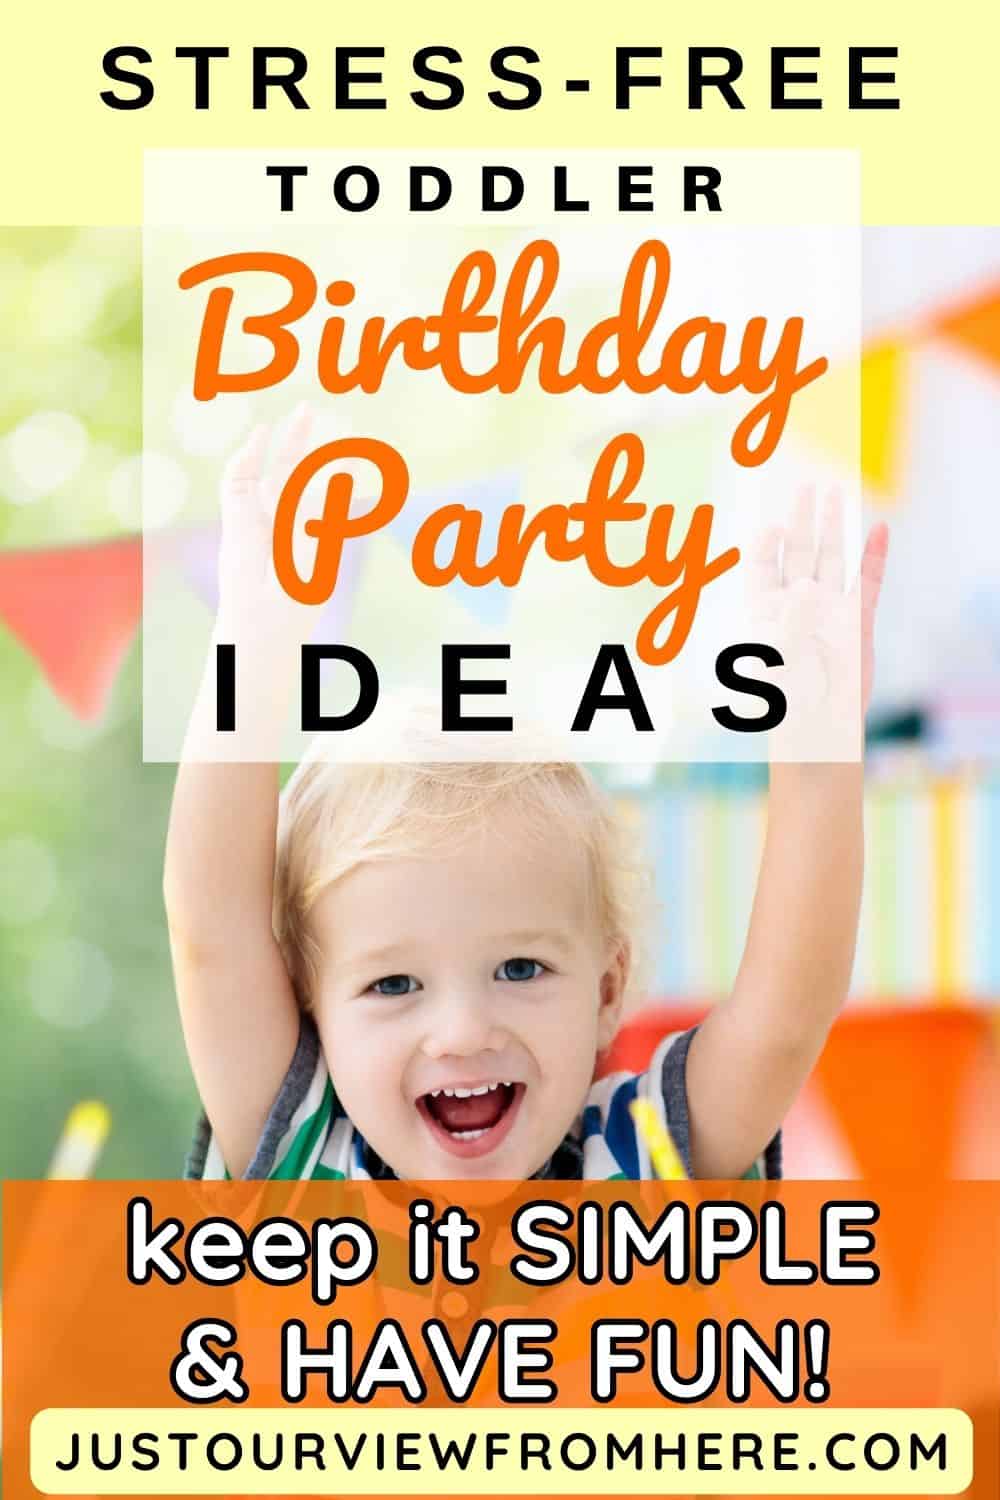 blonde toddler boy with arms above head birthday banners behind him, text overlay stress free toddler birthday party ideas keep it simple and have fun